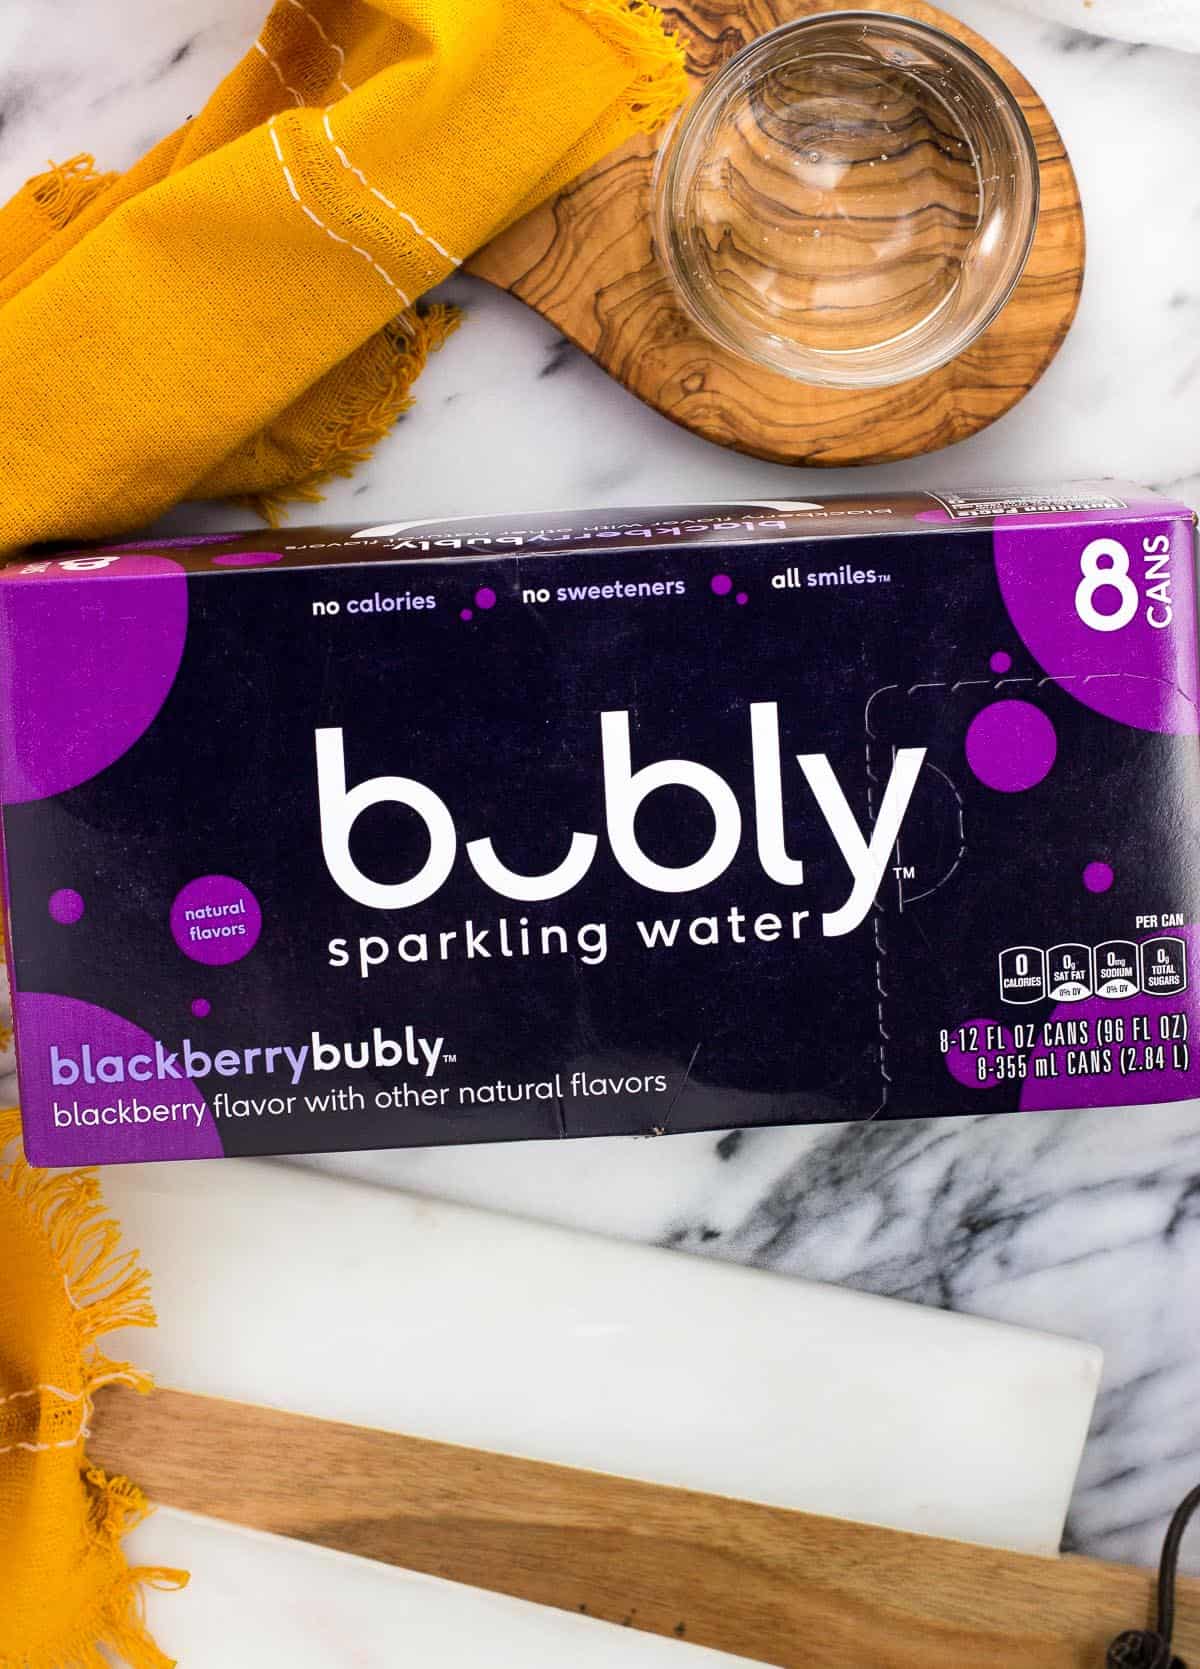 A cardboard carton of blackberry bubly water cans.